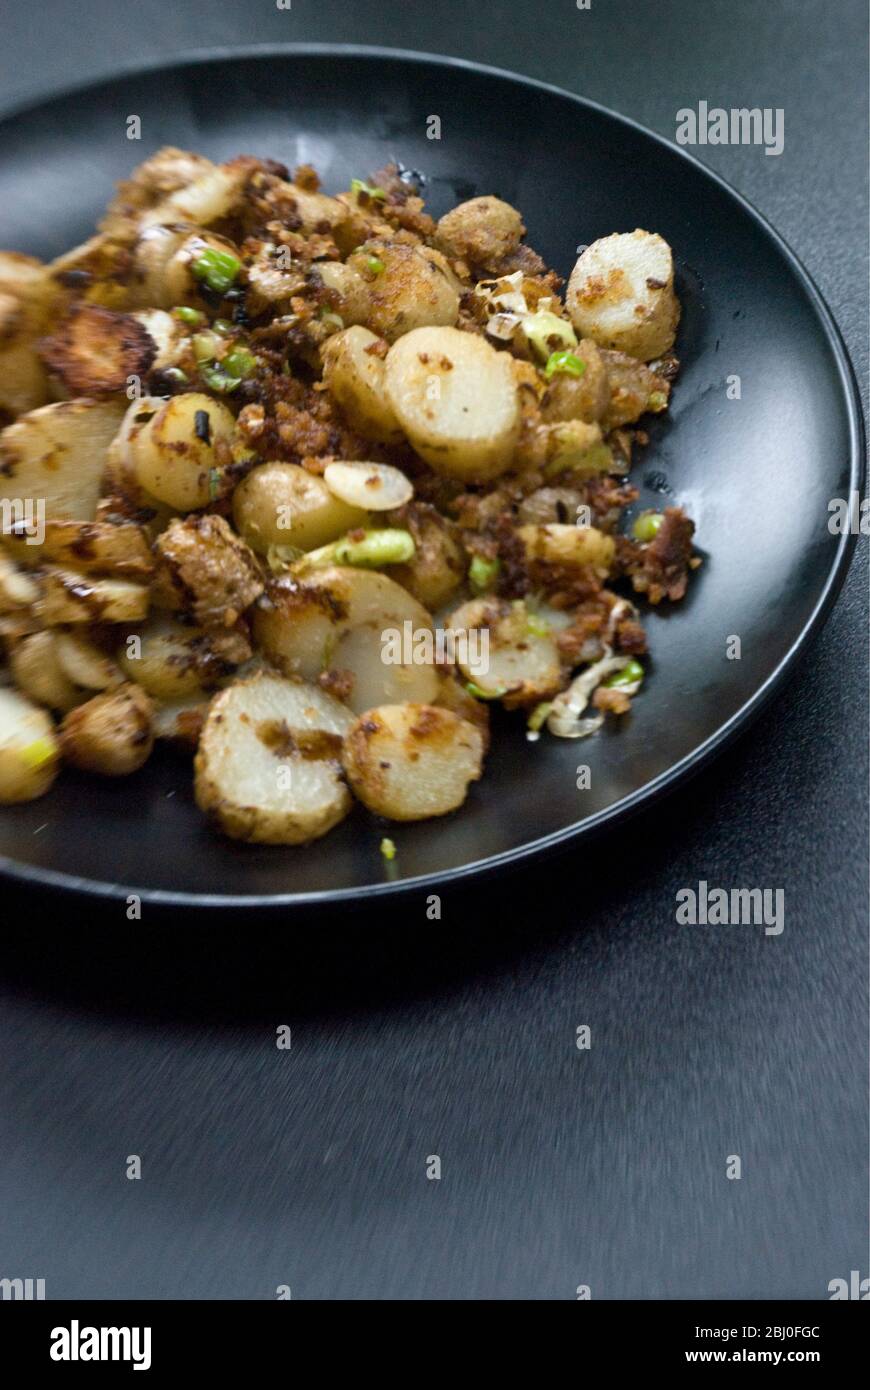 Dish of fried potatoes, sauteed with anchovies, spring onions and breadcrumbs. - Stock Photo